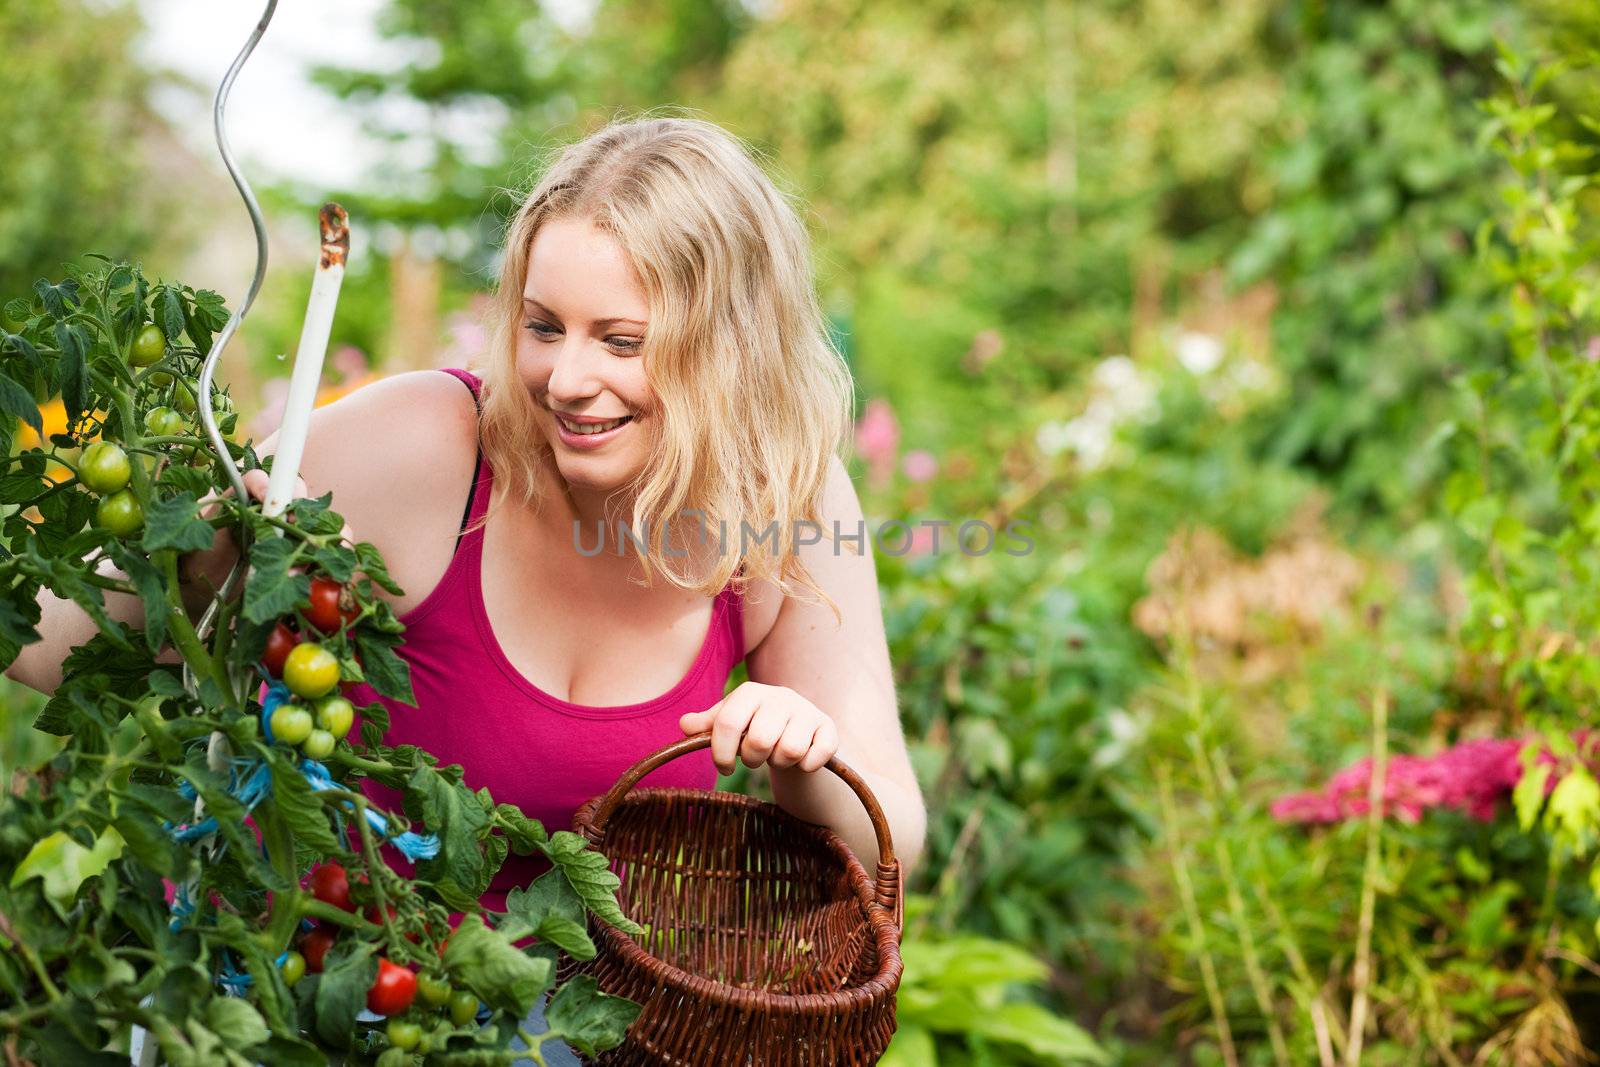 Gardening - Beautiful woman harvesting fresh tomatoes in her garden on a sunny day